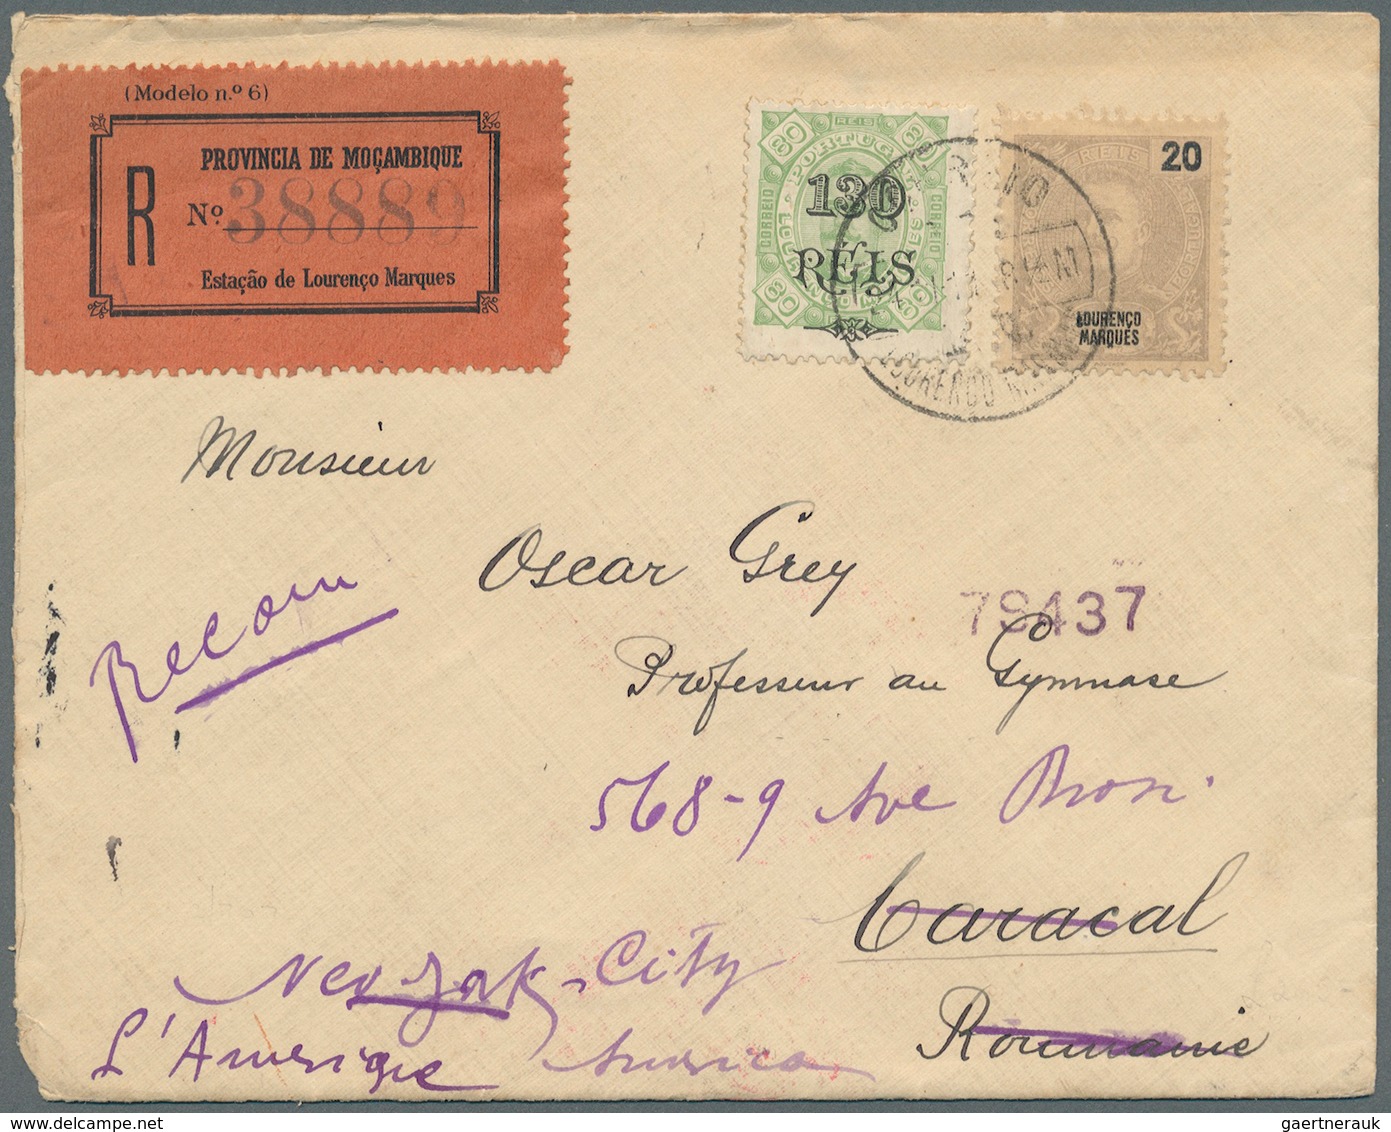 Mocambique: 1895/1917, Mocambique/Area, group of eleven better entires with many attractive franking